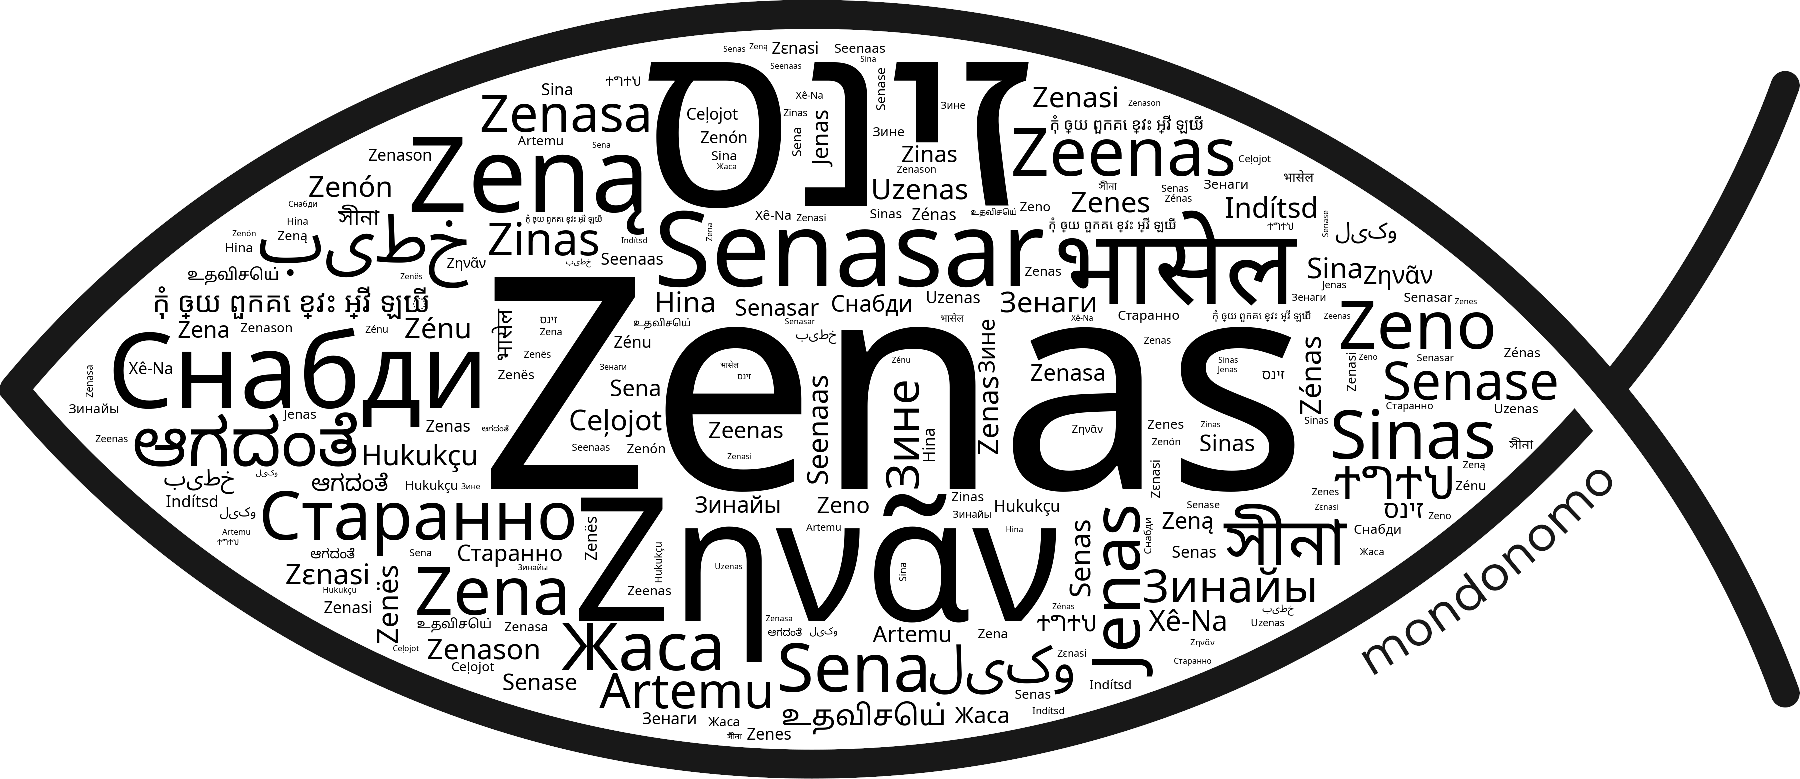 Name Zenas in the world's Bibles